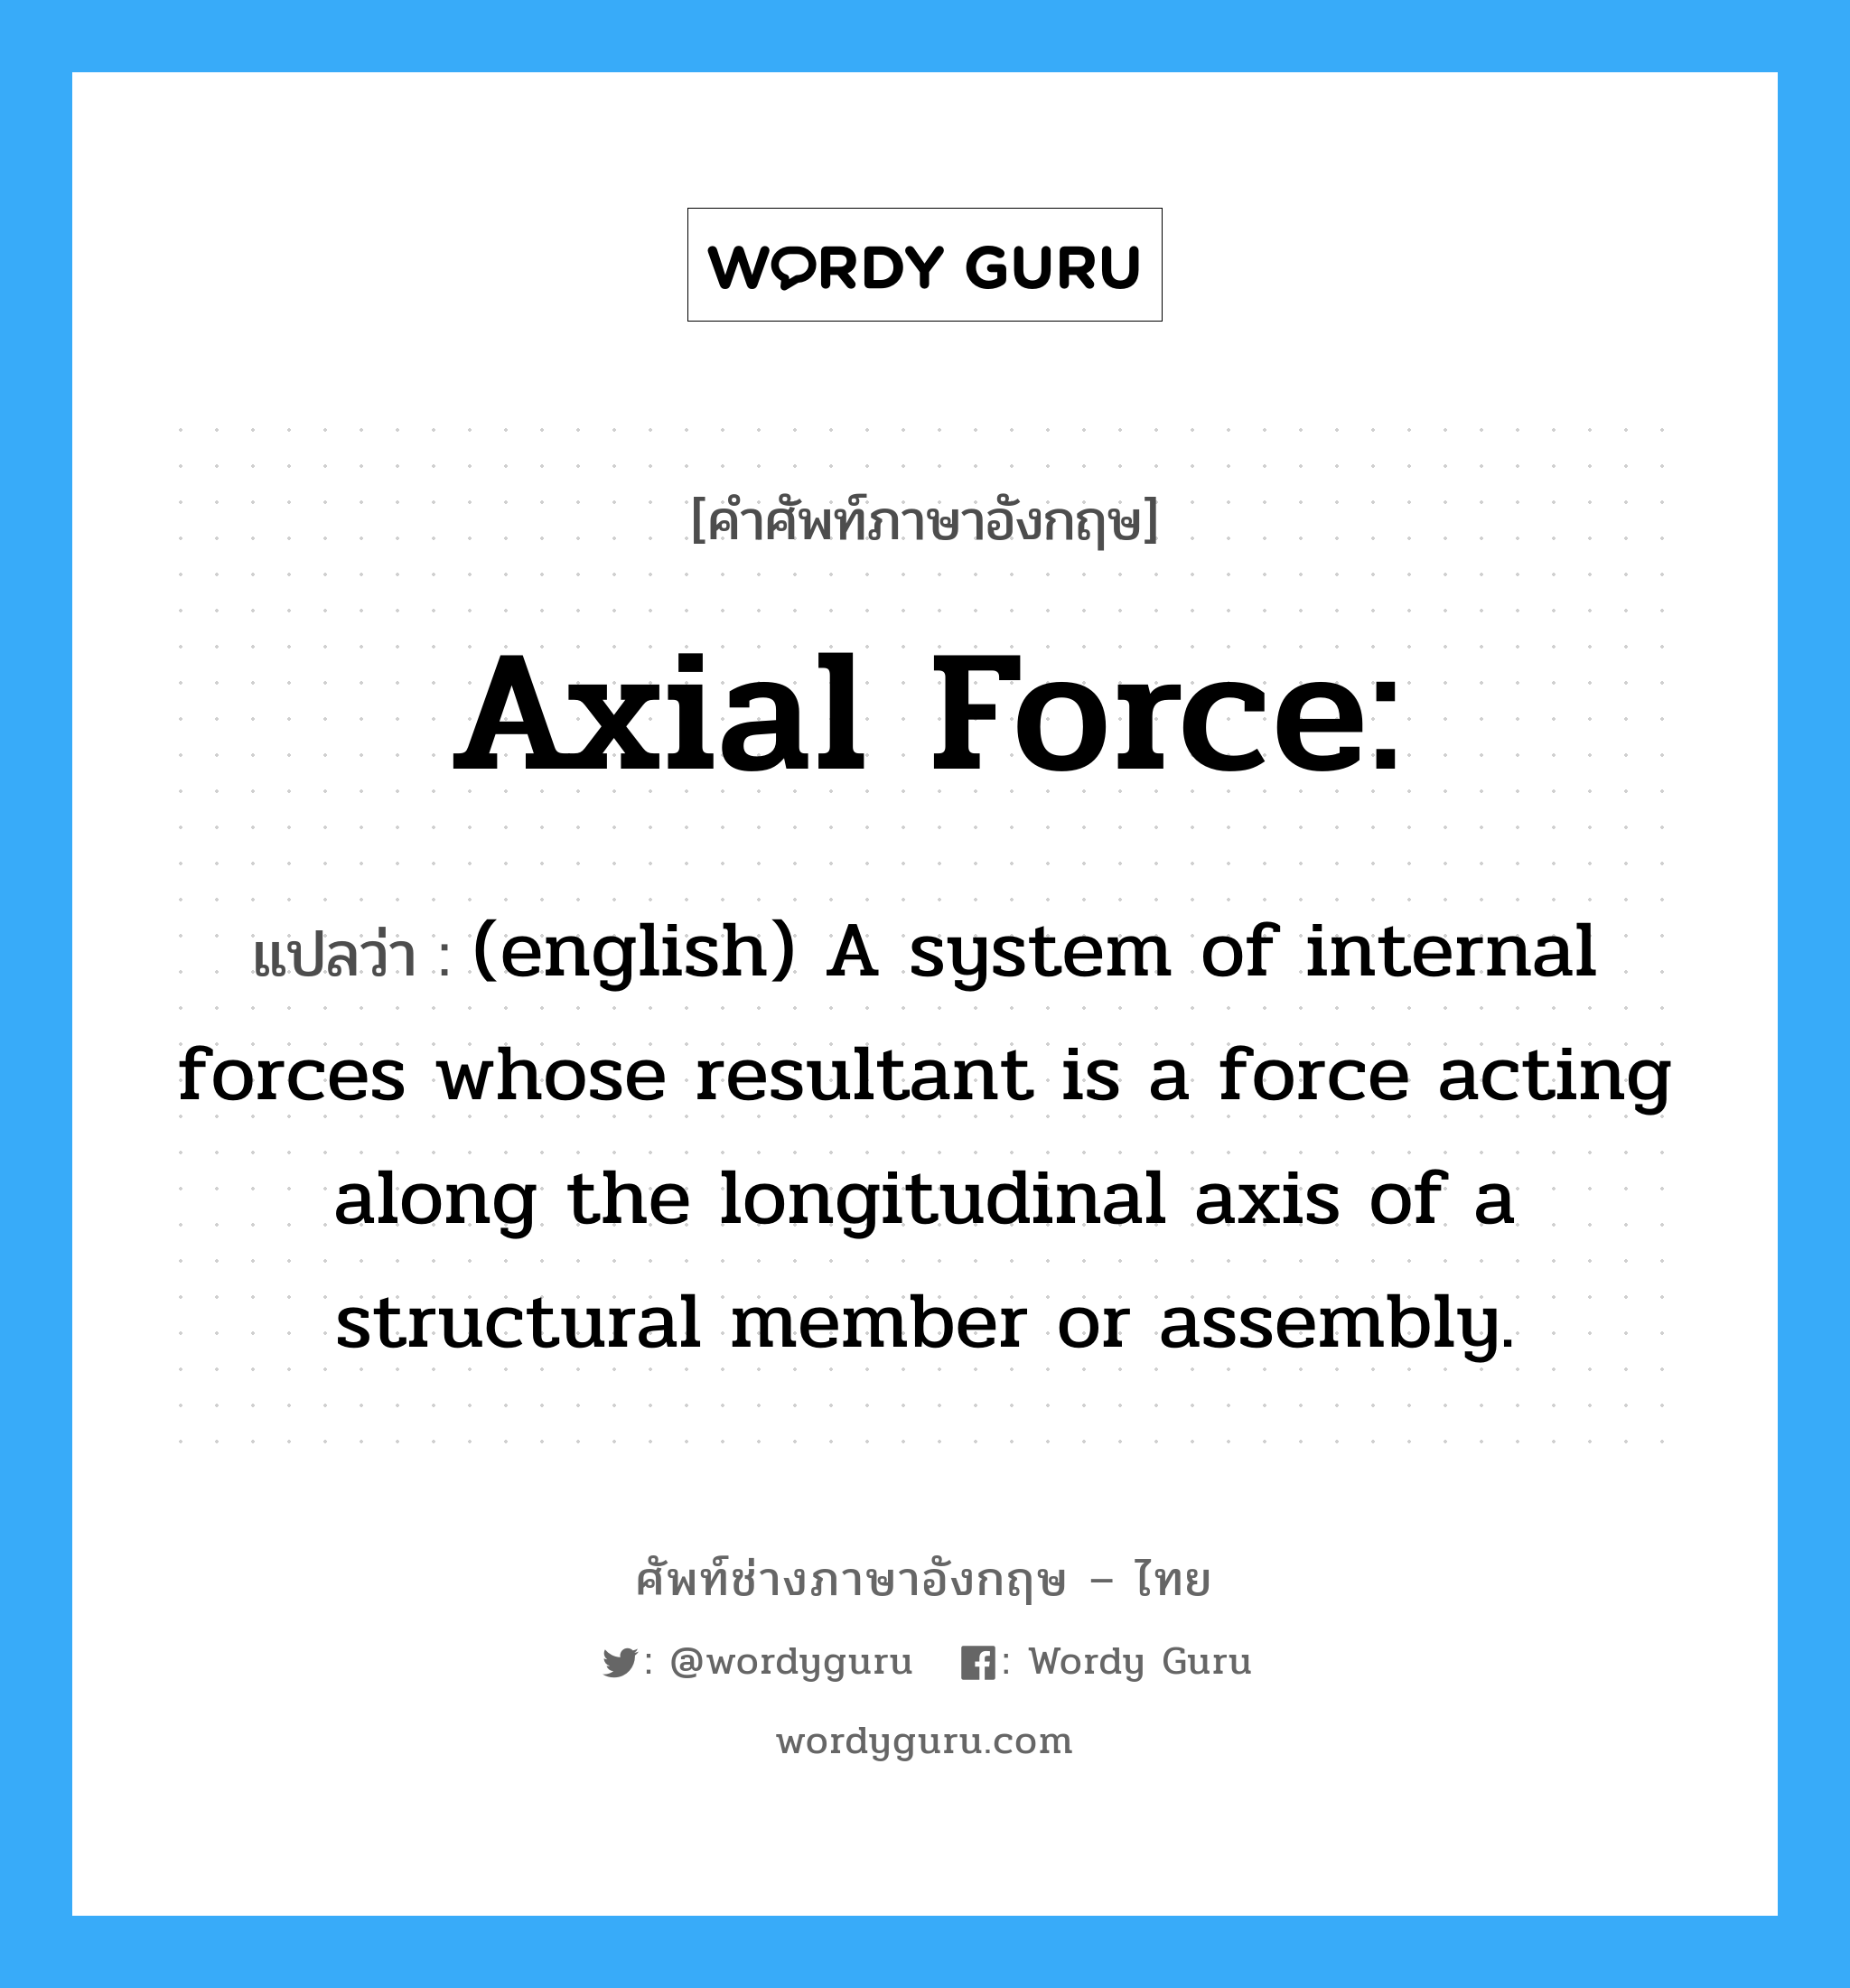 Axial force: แปลว่า?, คำศัพท์ช่างภาษาอังกฤษ - ไทย Axial force: คำศัพท์ภาษาอังกฤษ Axial force: แปลว่า (english) A system of internal forces whose resultant is a force acting along the longitudinal axis of a structural member or assembly.